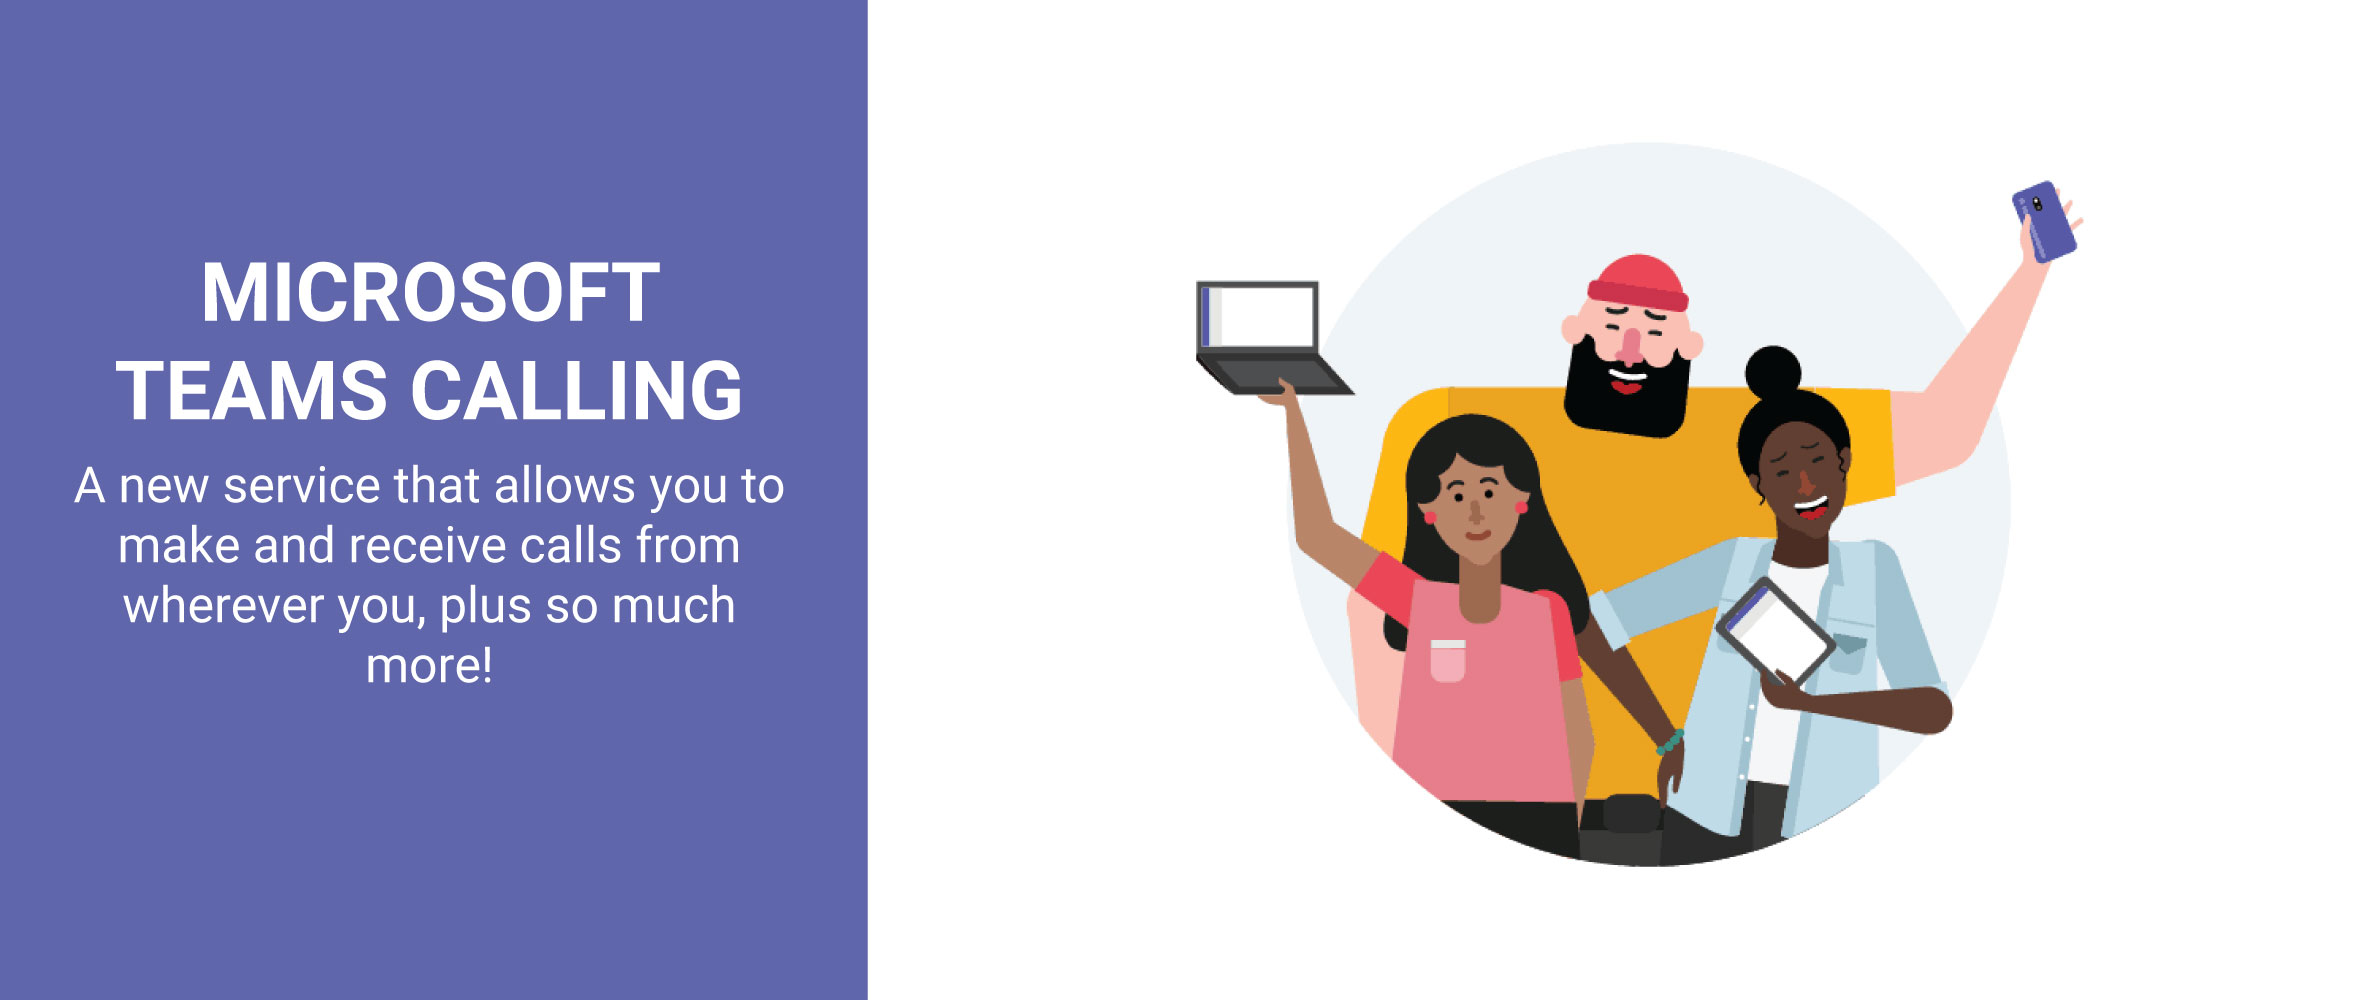 Microsoft Teams Calling: A new service that allows you to make and receive calls from wherever you are, plus so much more!